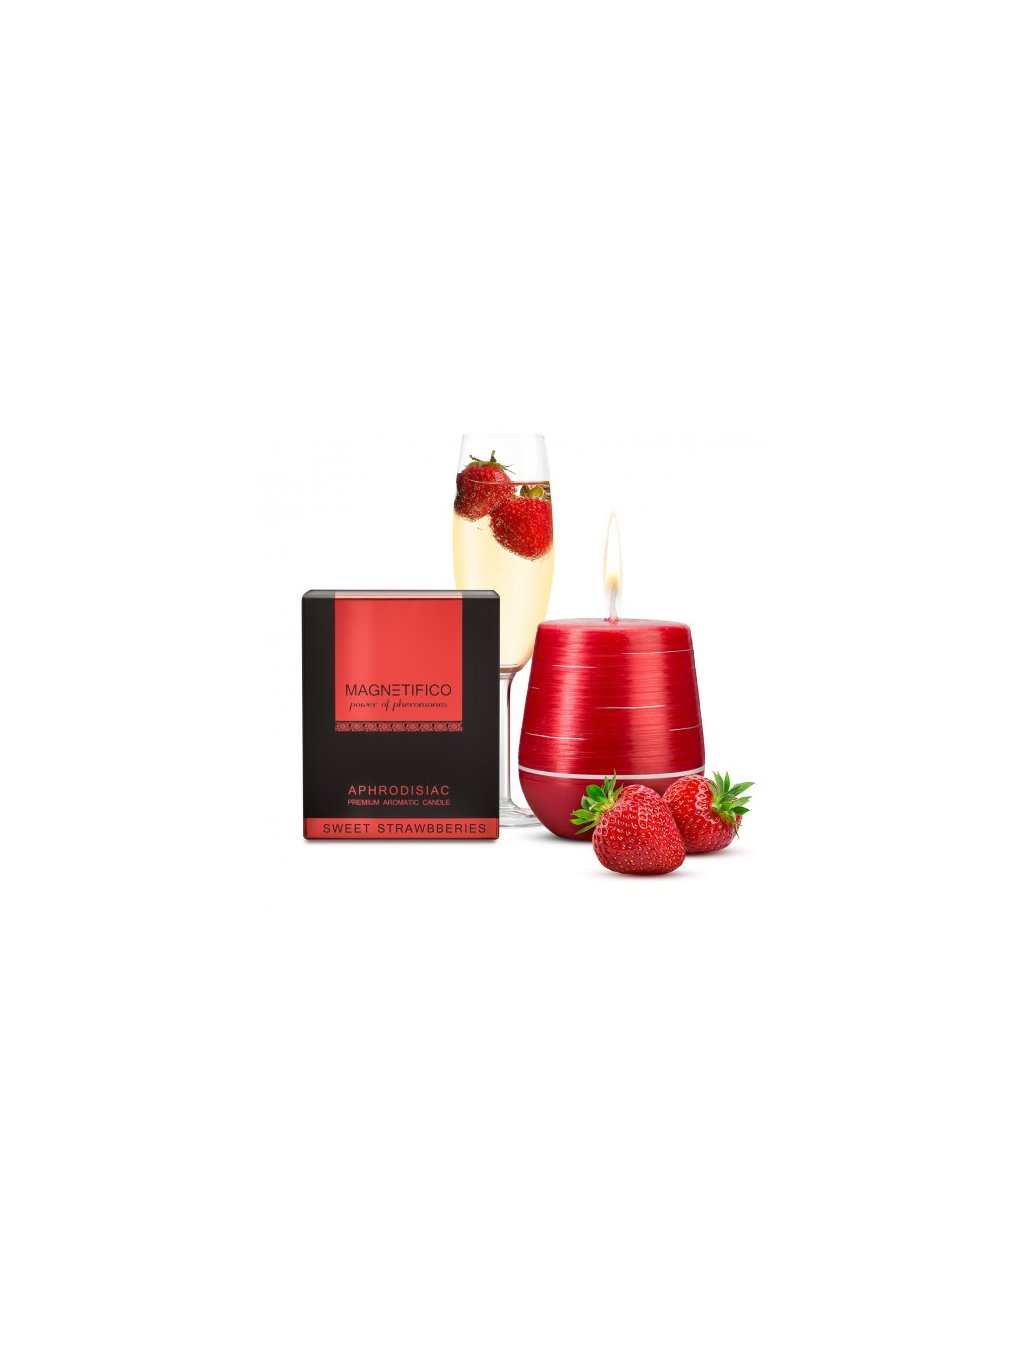 Magnetifico aphrodisiac candle Sweet strawberries / aphrodisiac scented  candle 